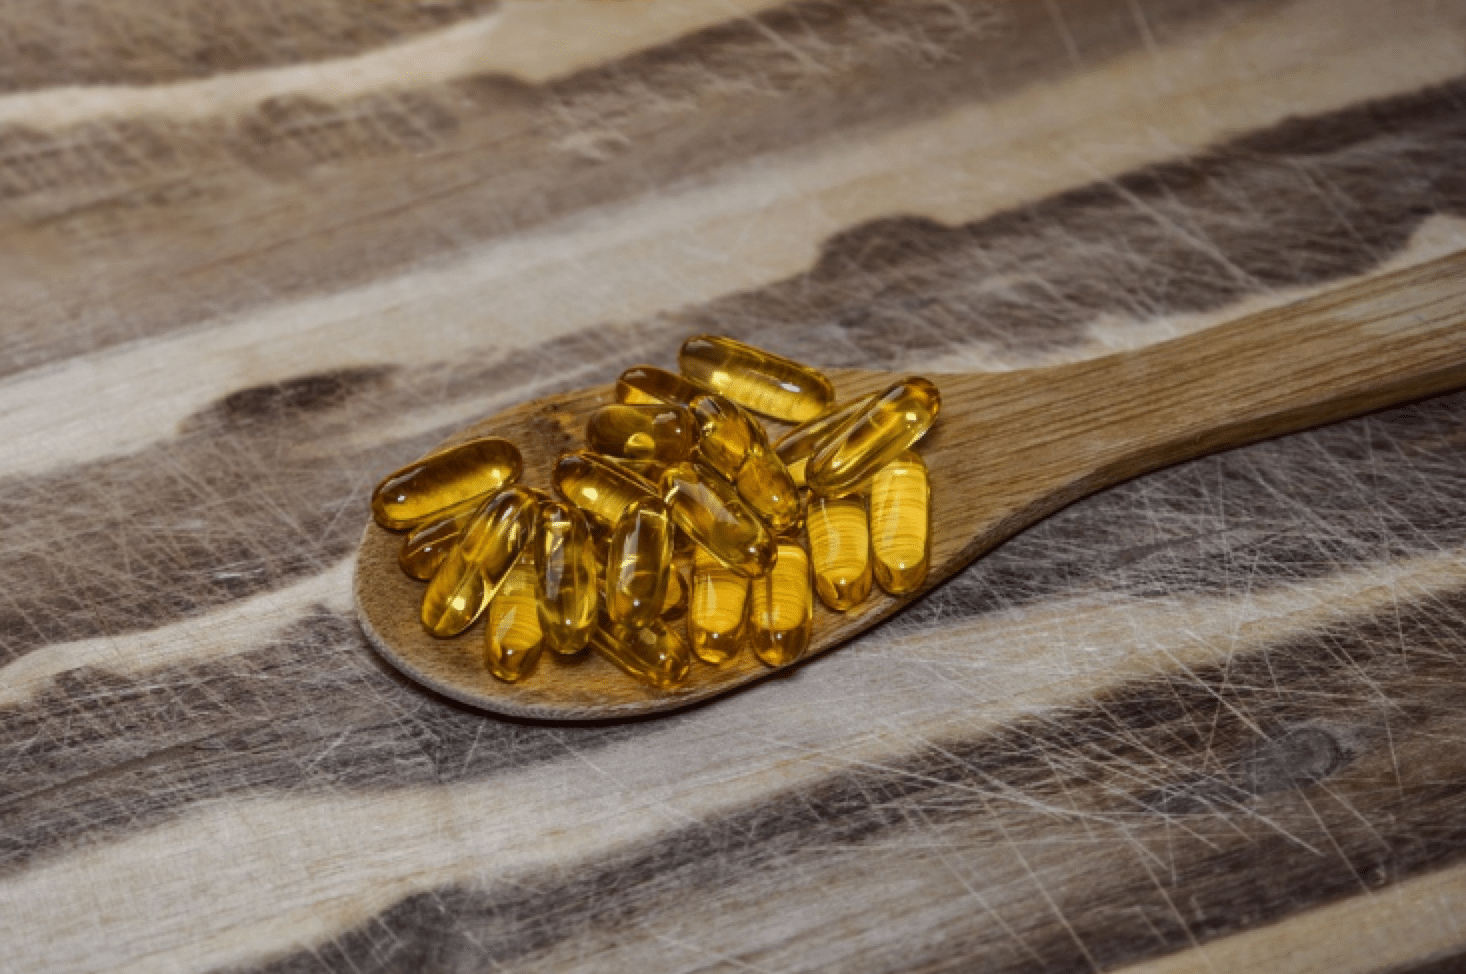 The power of Omega 3, natural allies for your health